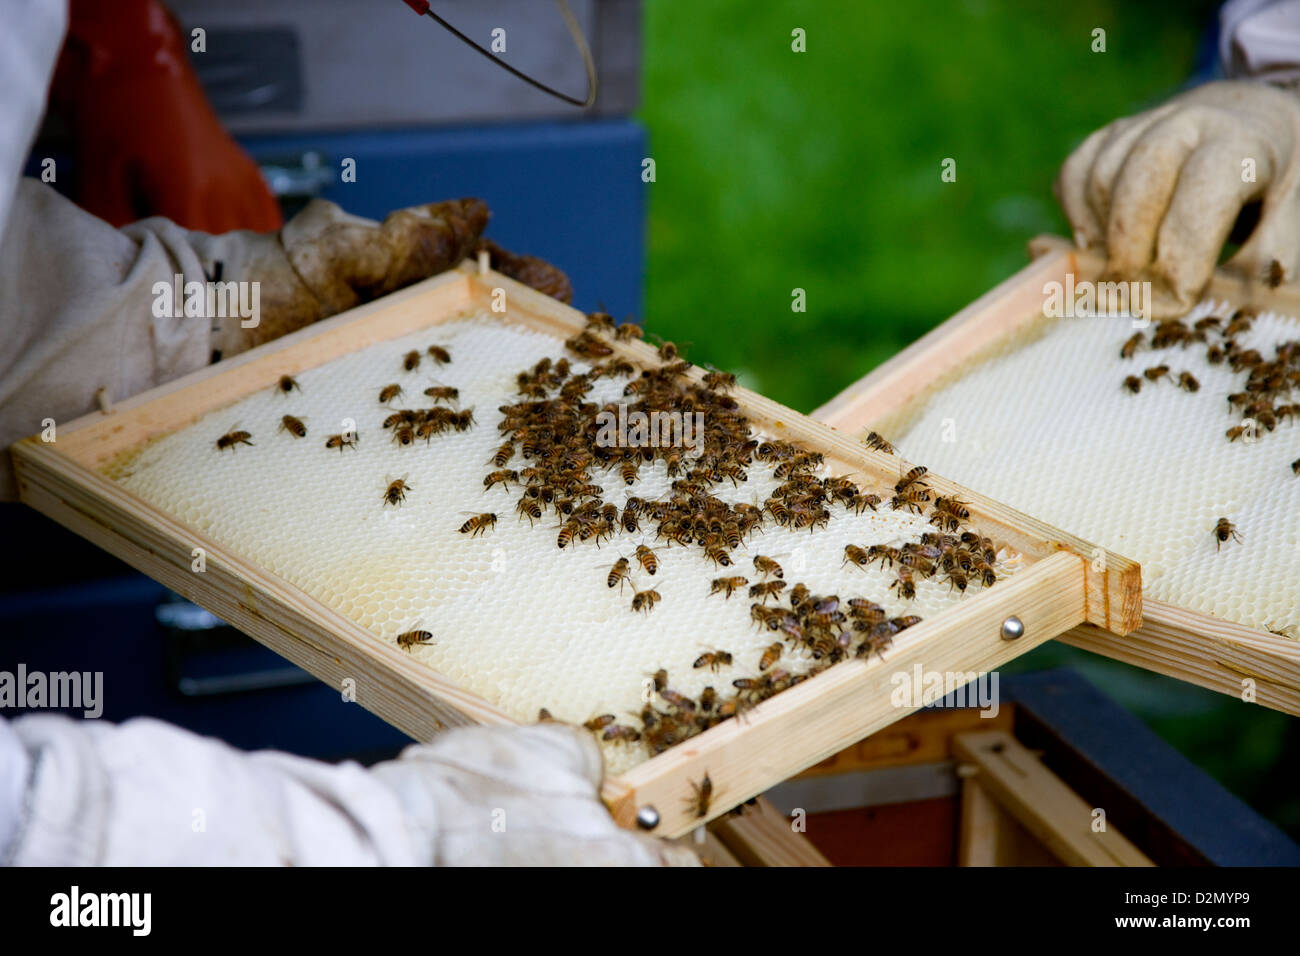 Frames removed from hive with  honey bees, Apis mellifera. Stock Photo